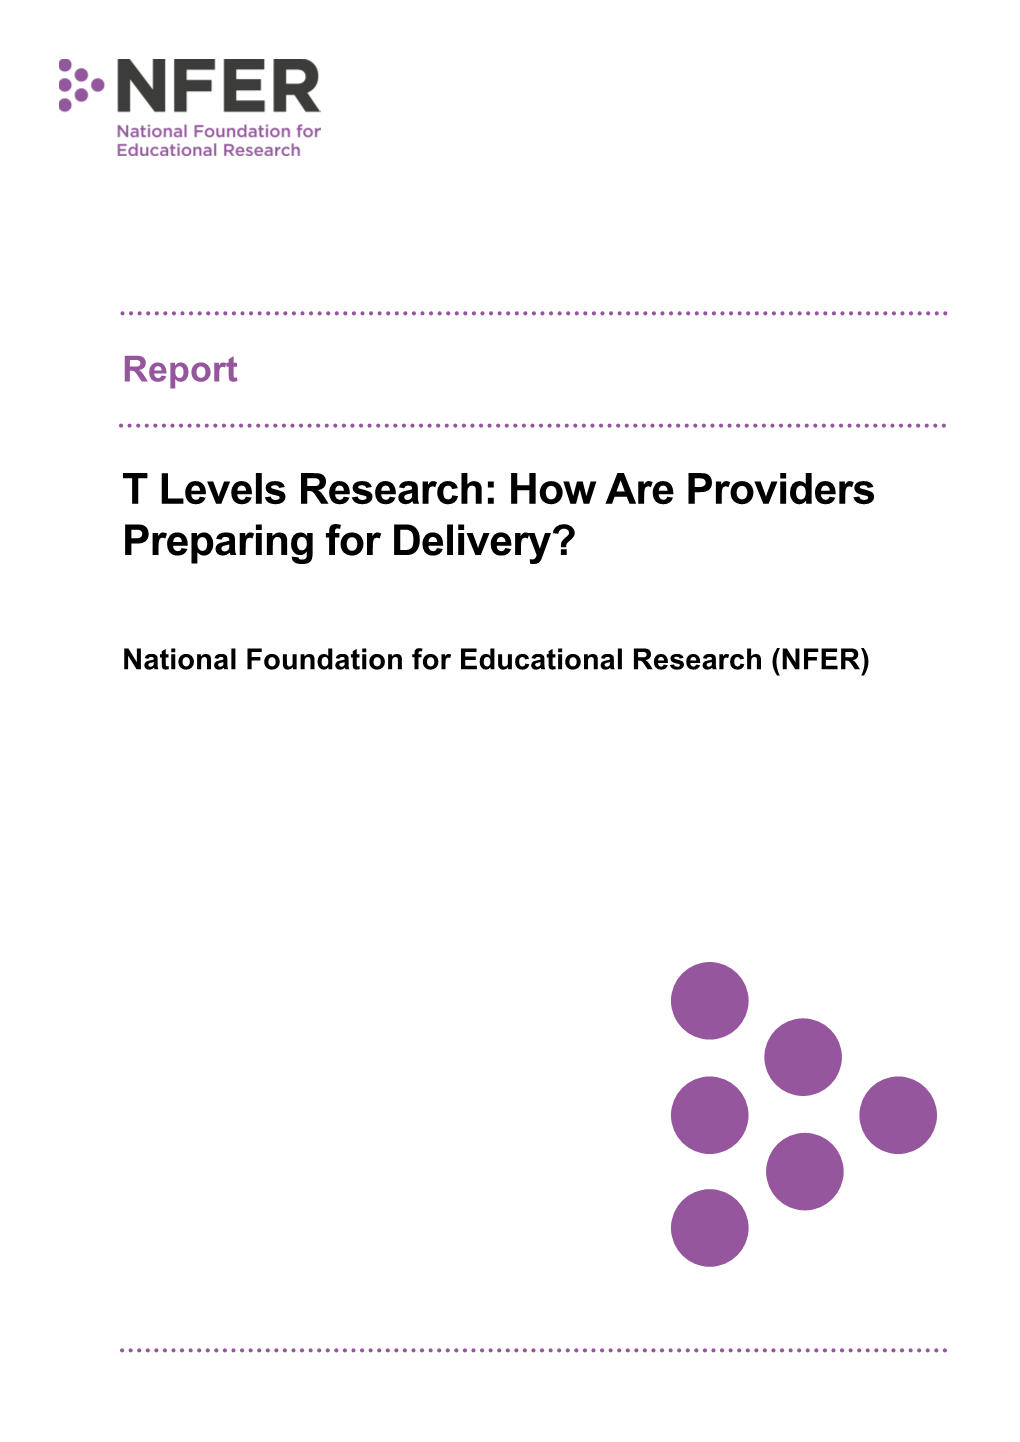 T Levels Research: How Are Providers Preparing for Delivery?